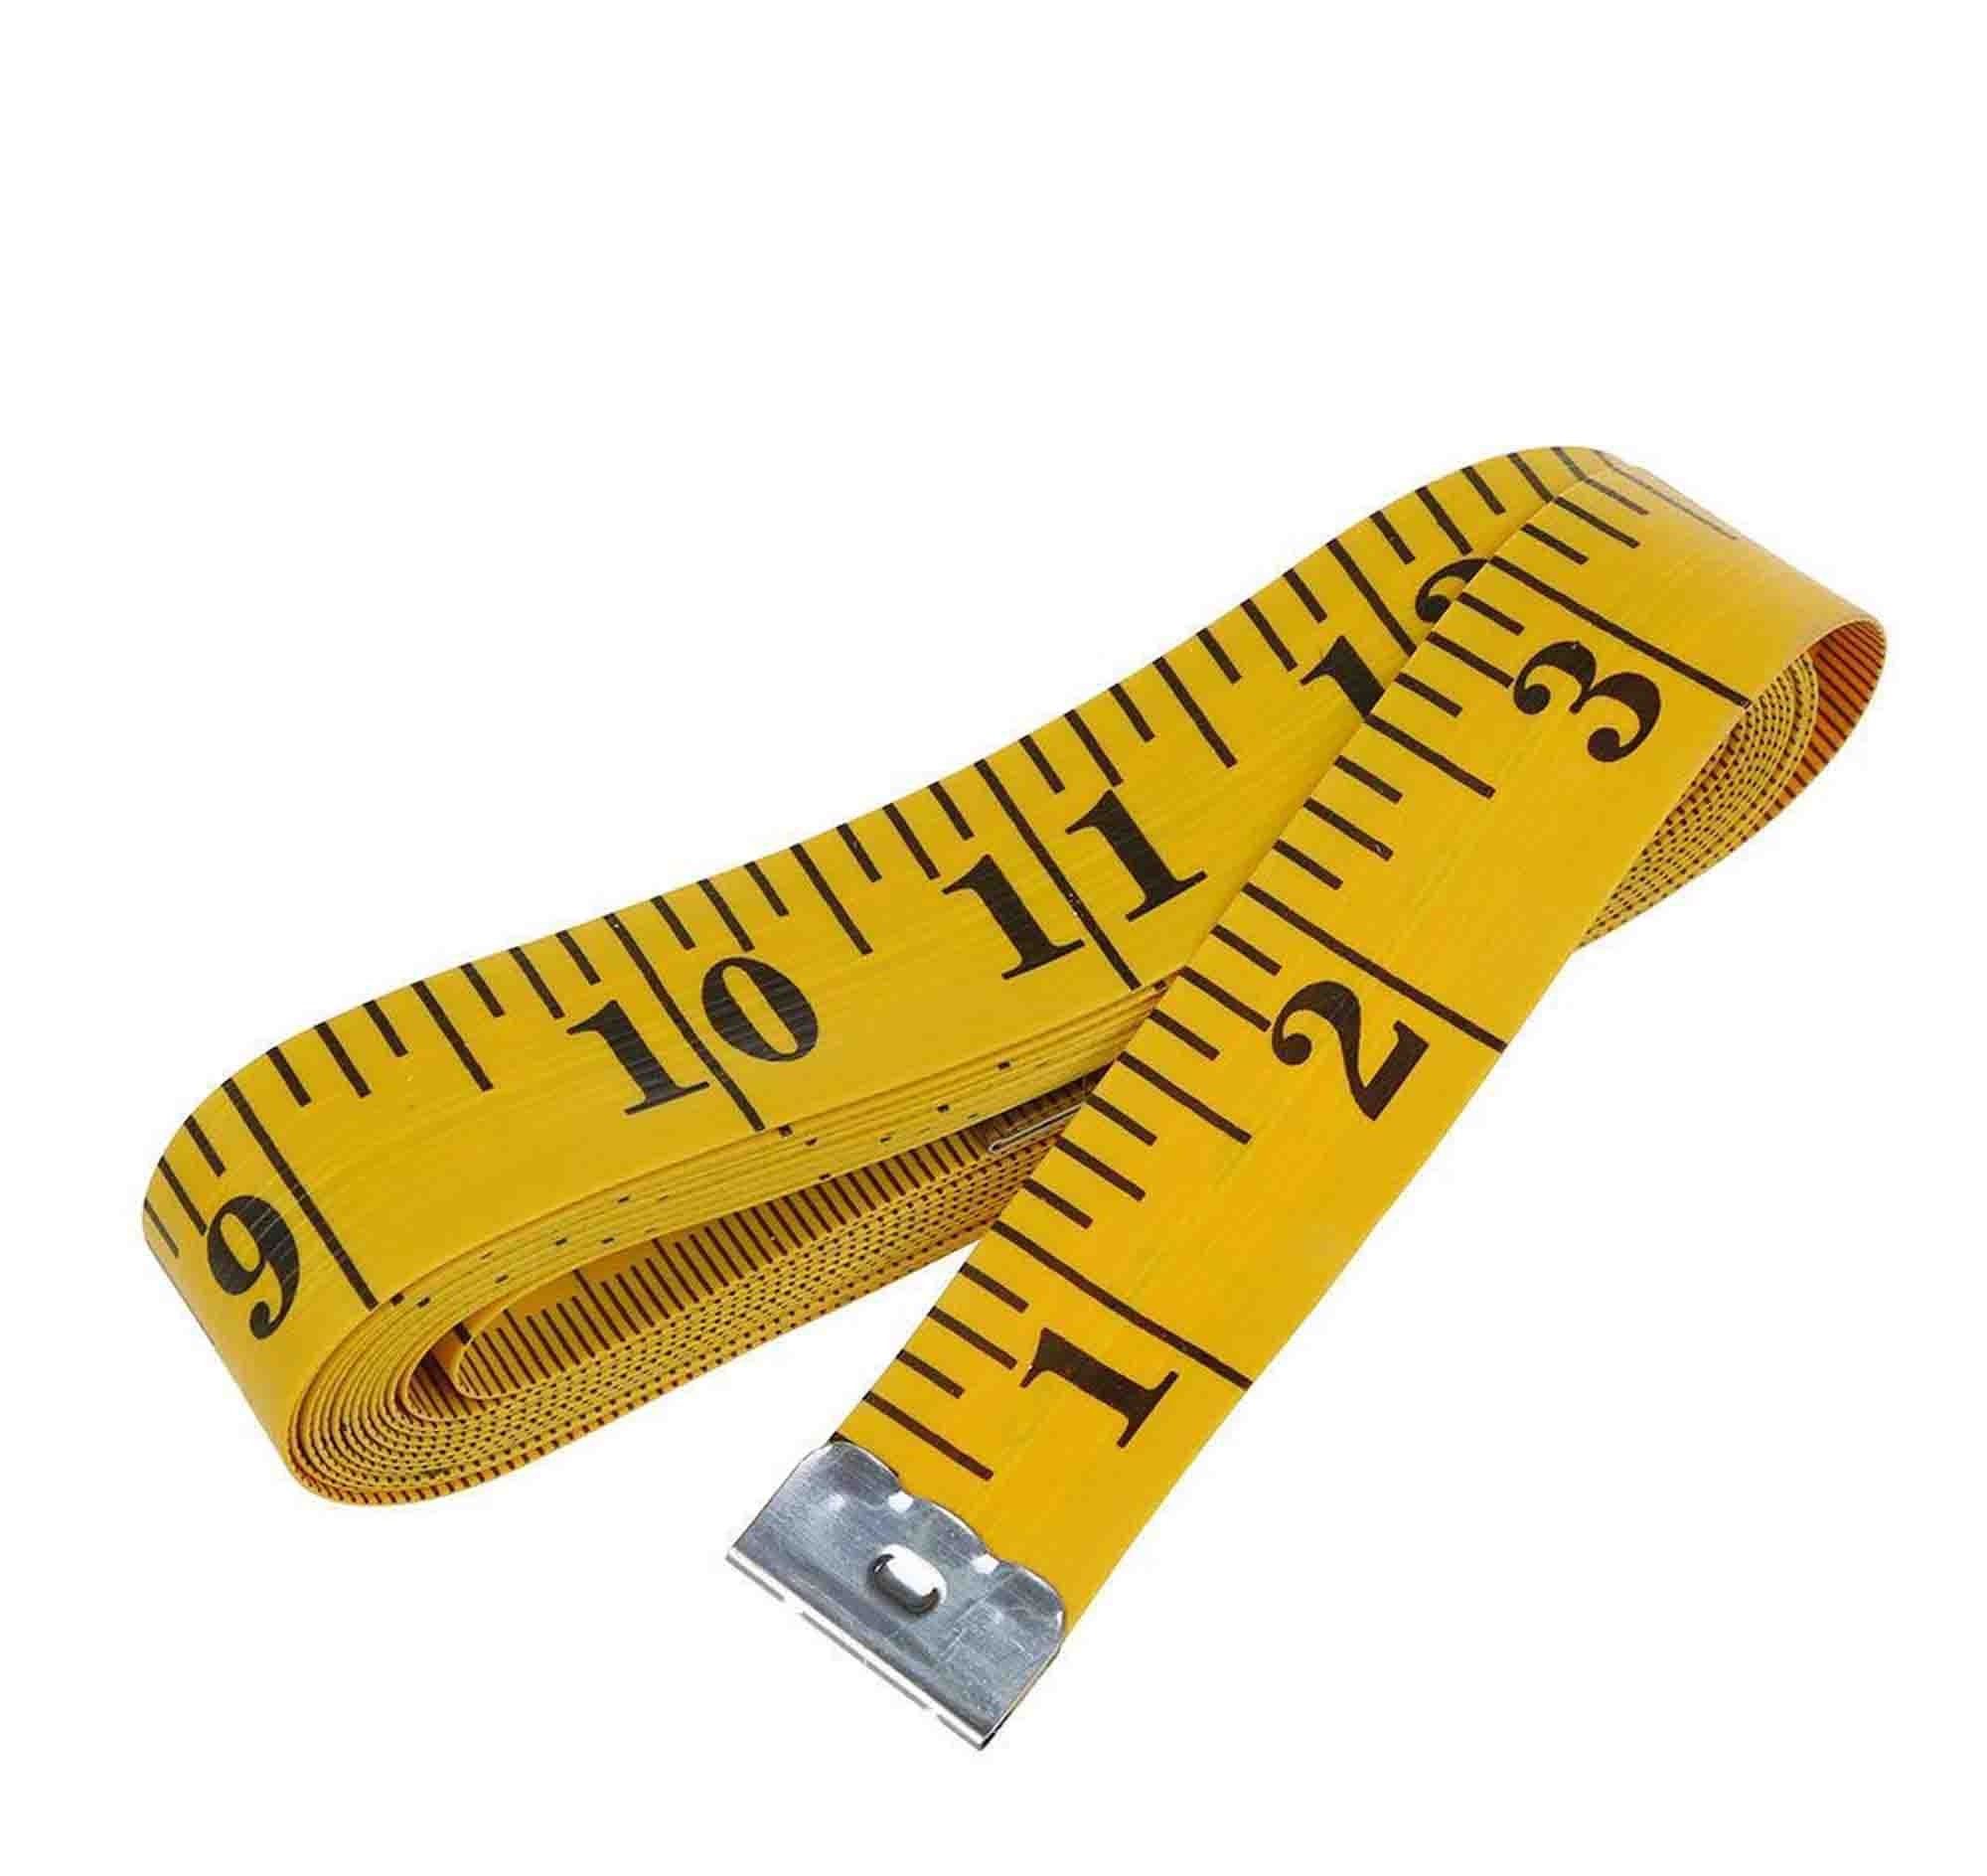 measuring-tape-for-body-measurement-sewing-standard-flexible-etsy